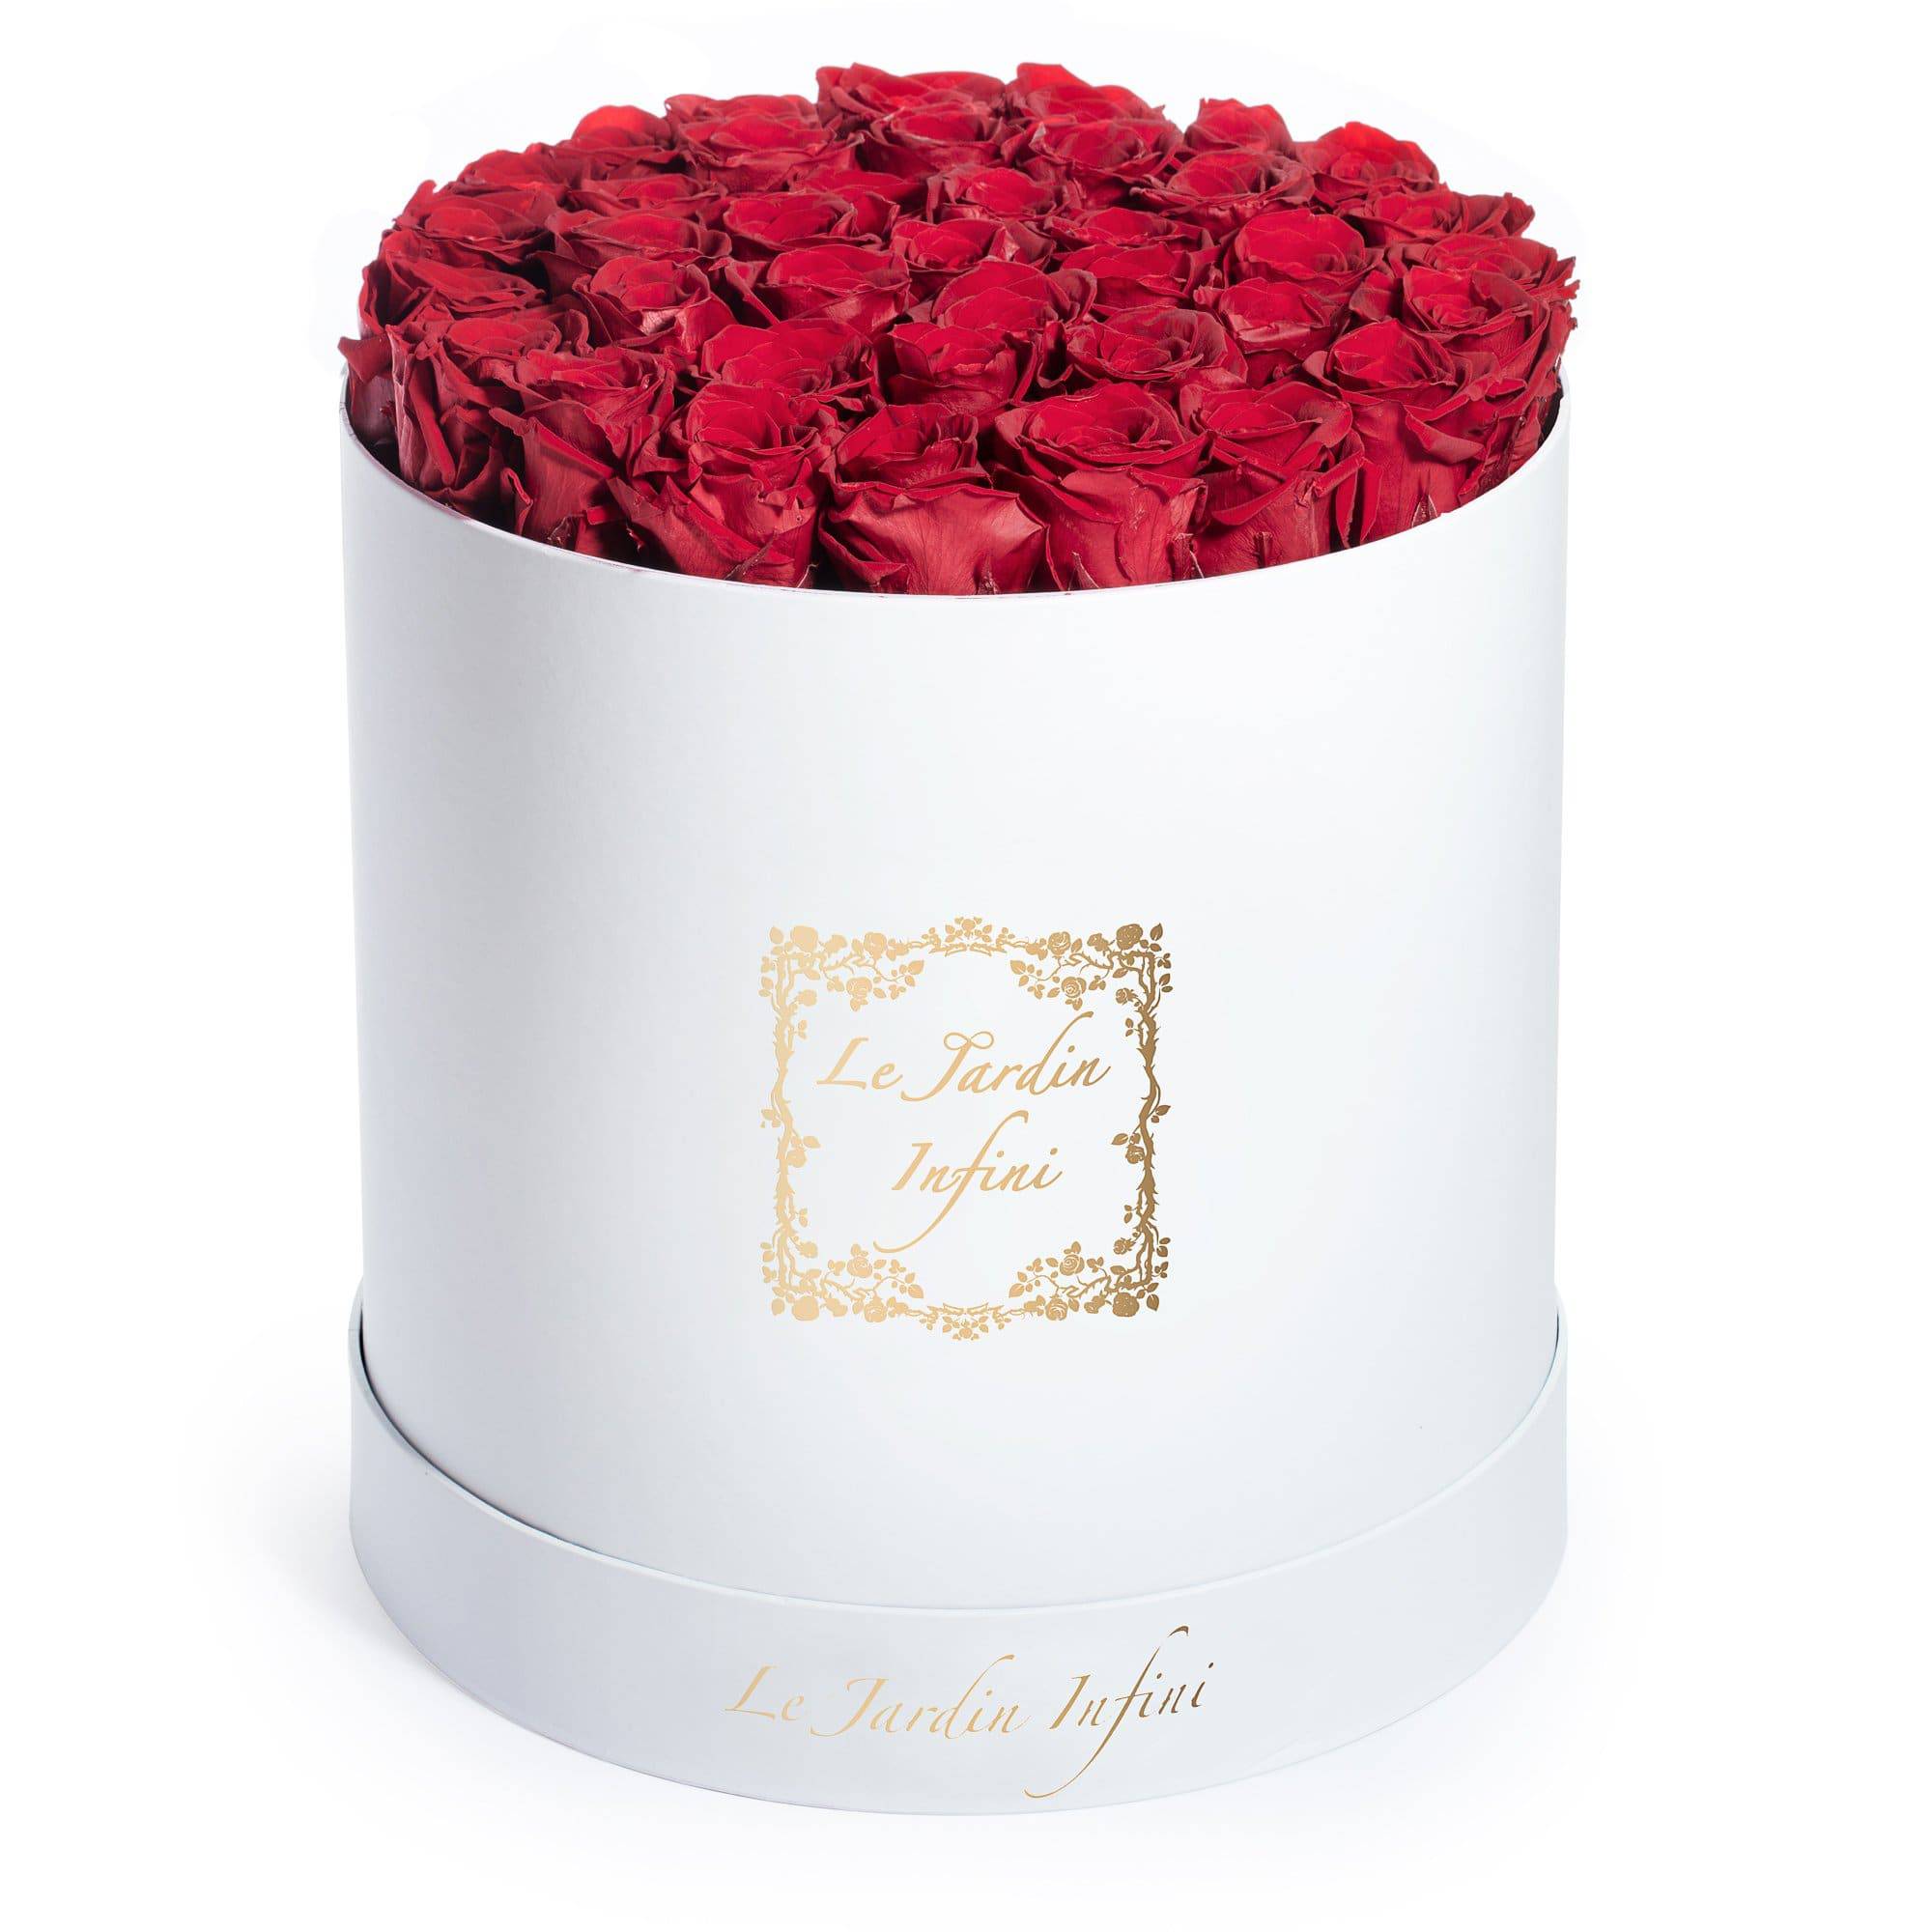 Red Preserved Roses - Large Round White Box - Le Jardin Infini Roses in a Box